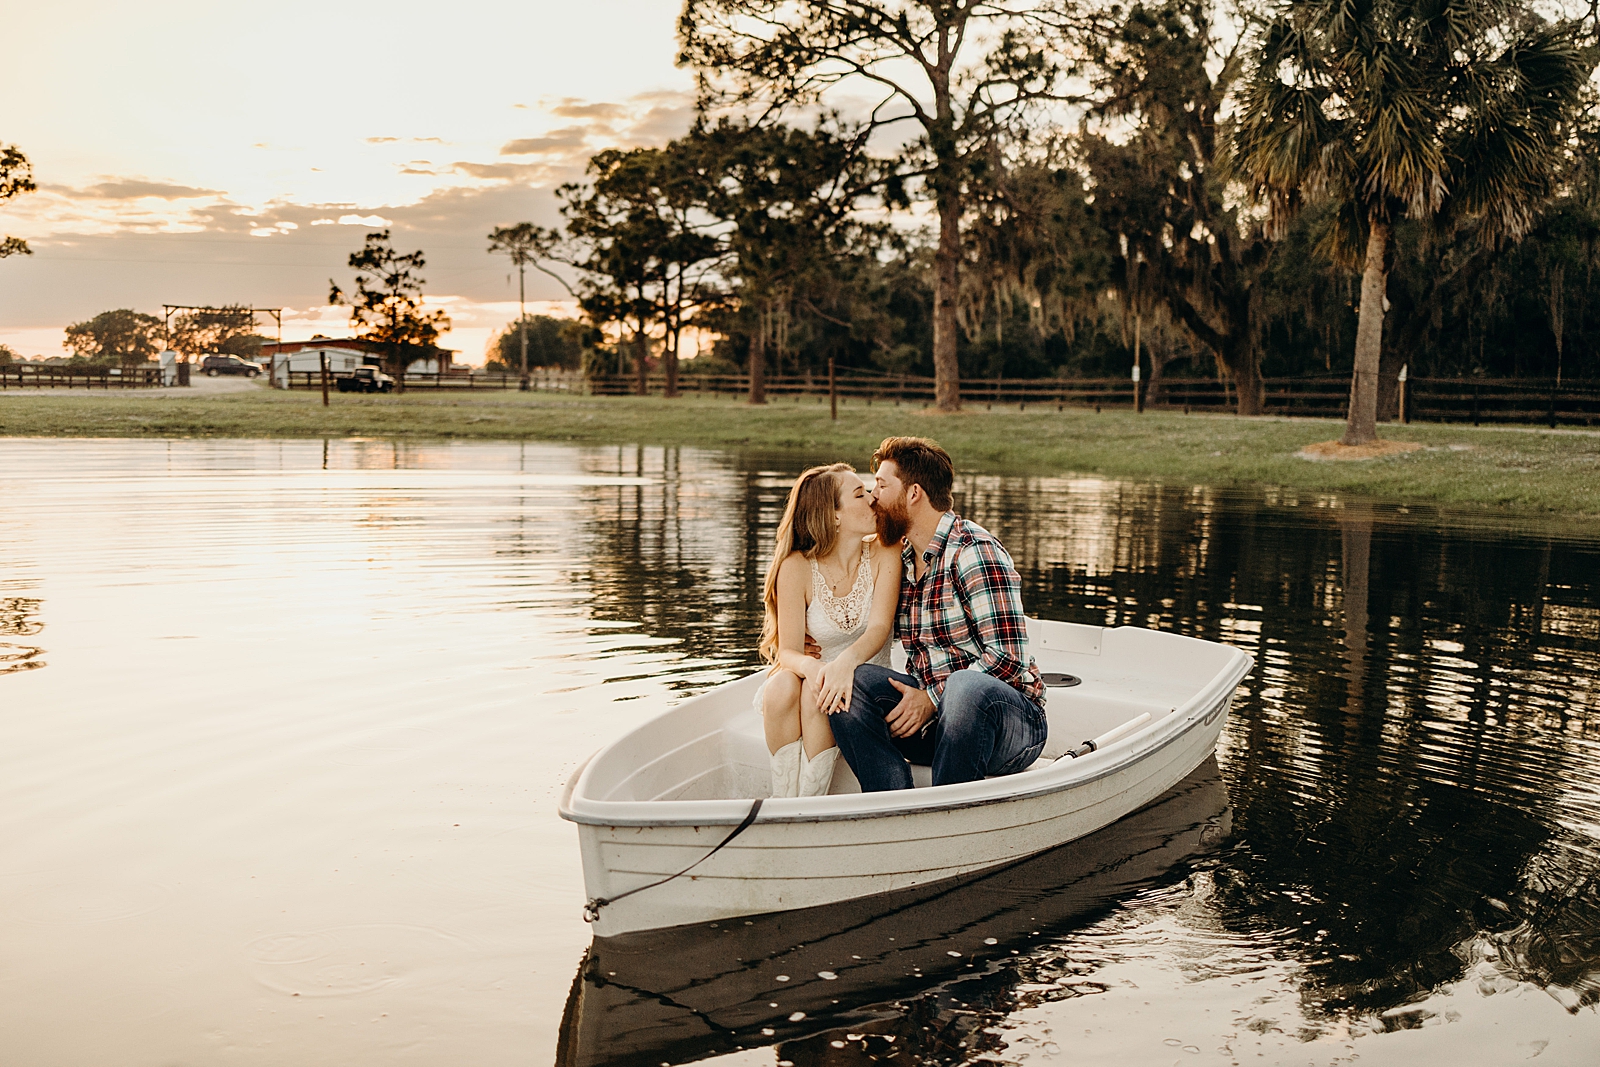 Couple sitting together and kissing on boat in the middle of the farm pond